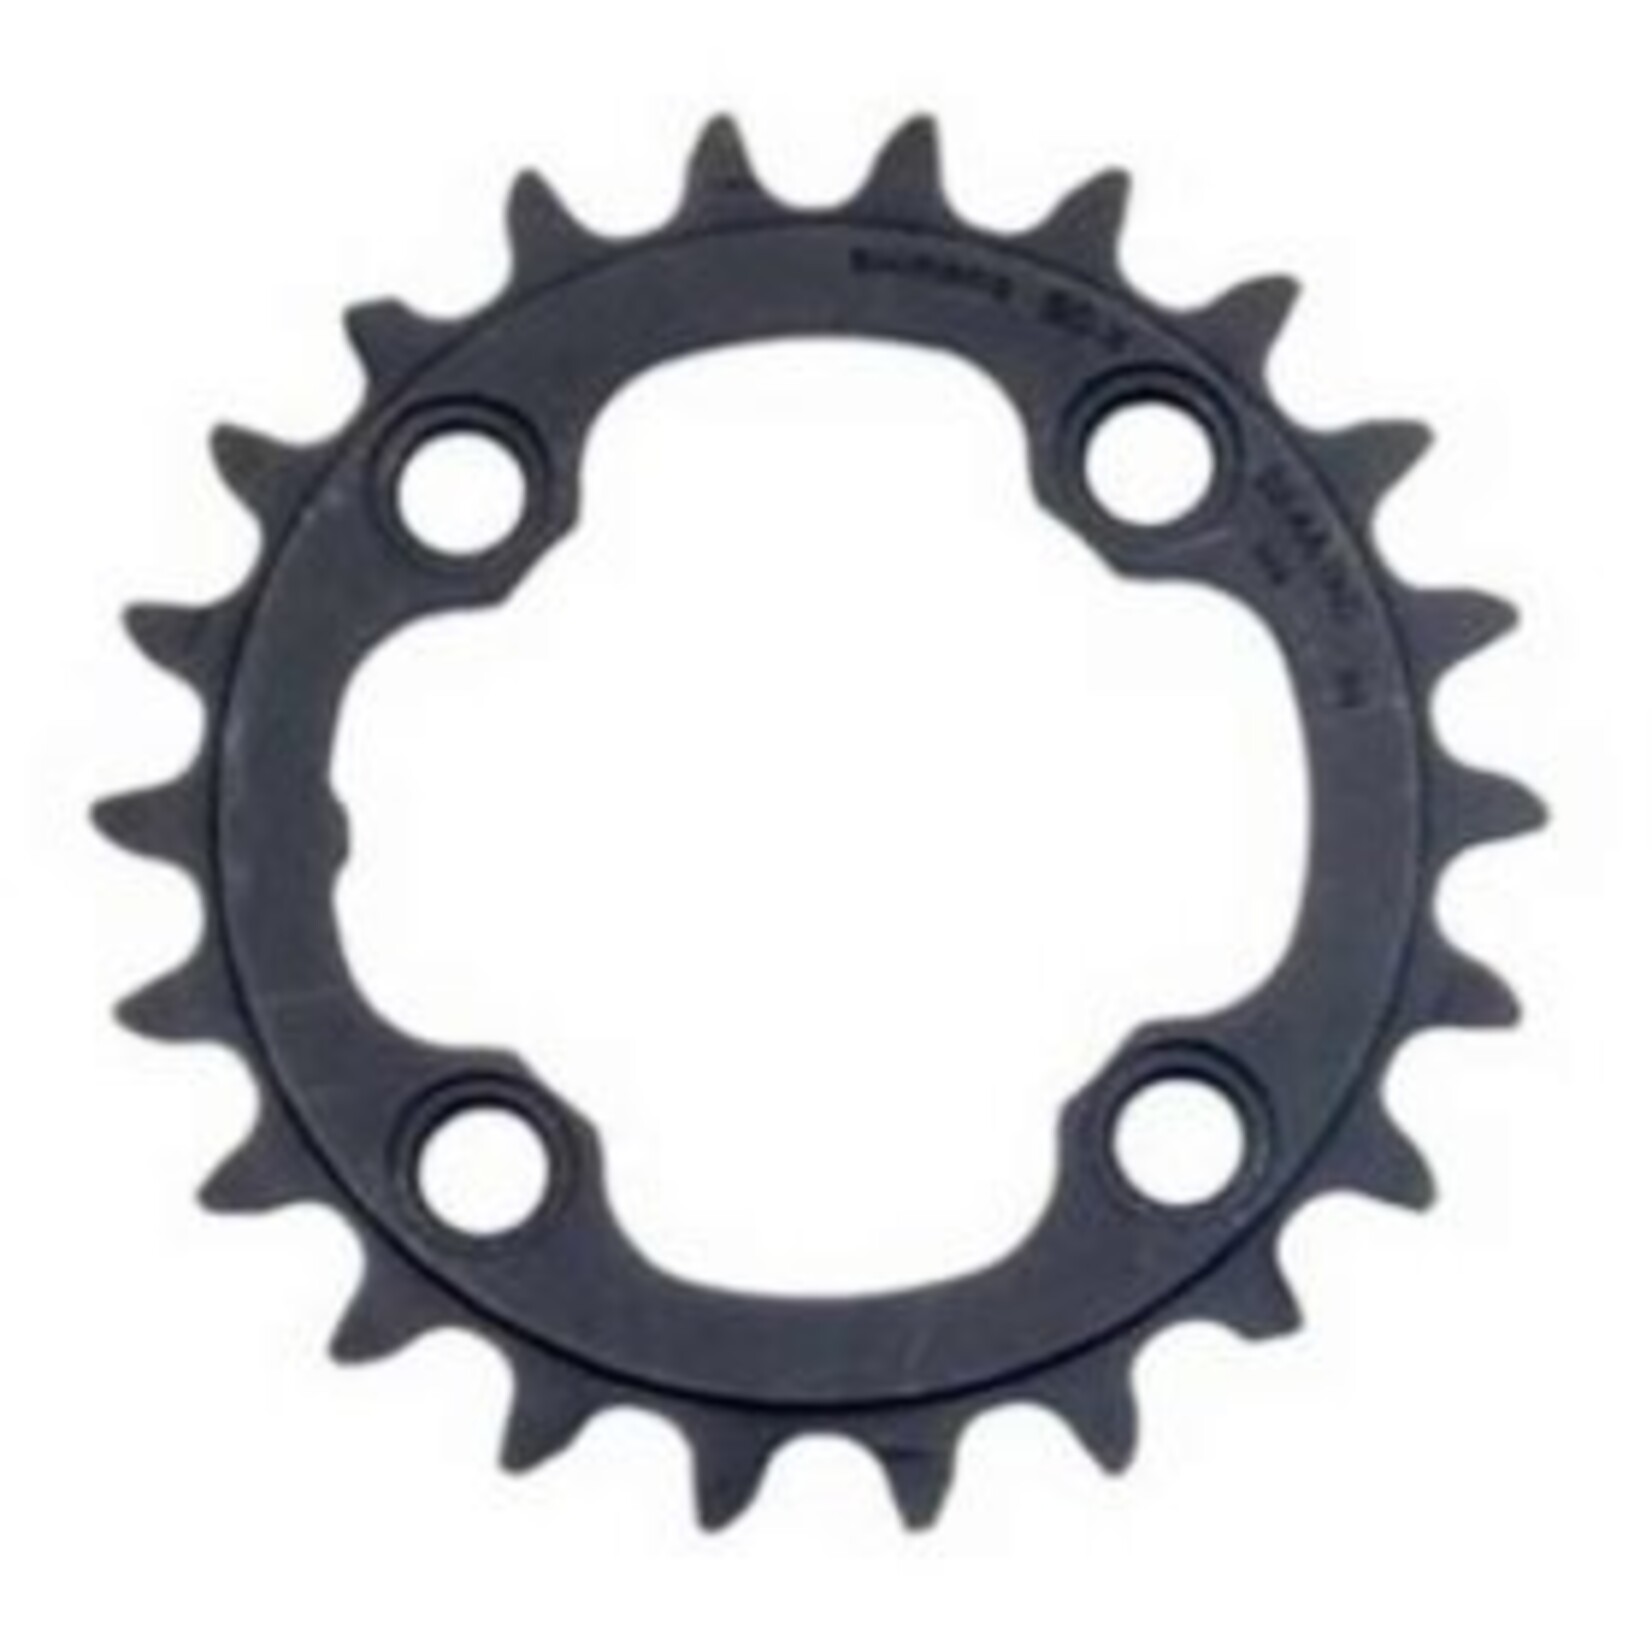 Shimano Deore FC-M590, Inner Chainring, 22 Tooth 64 BCD